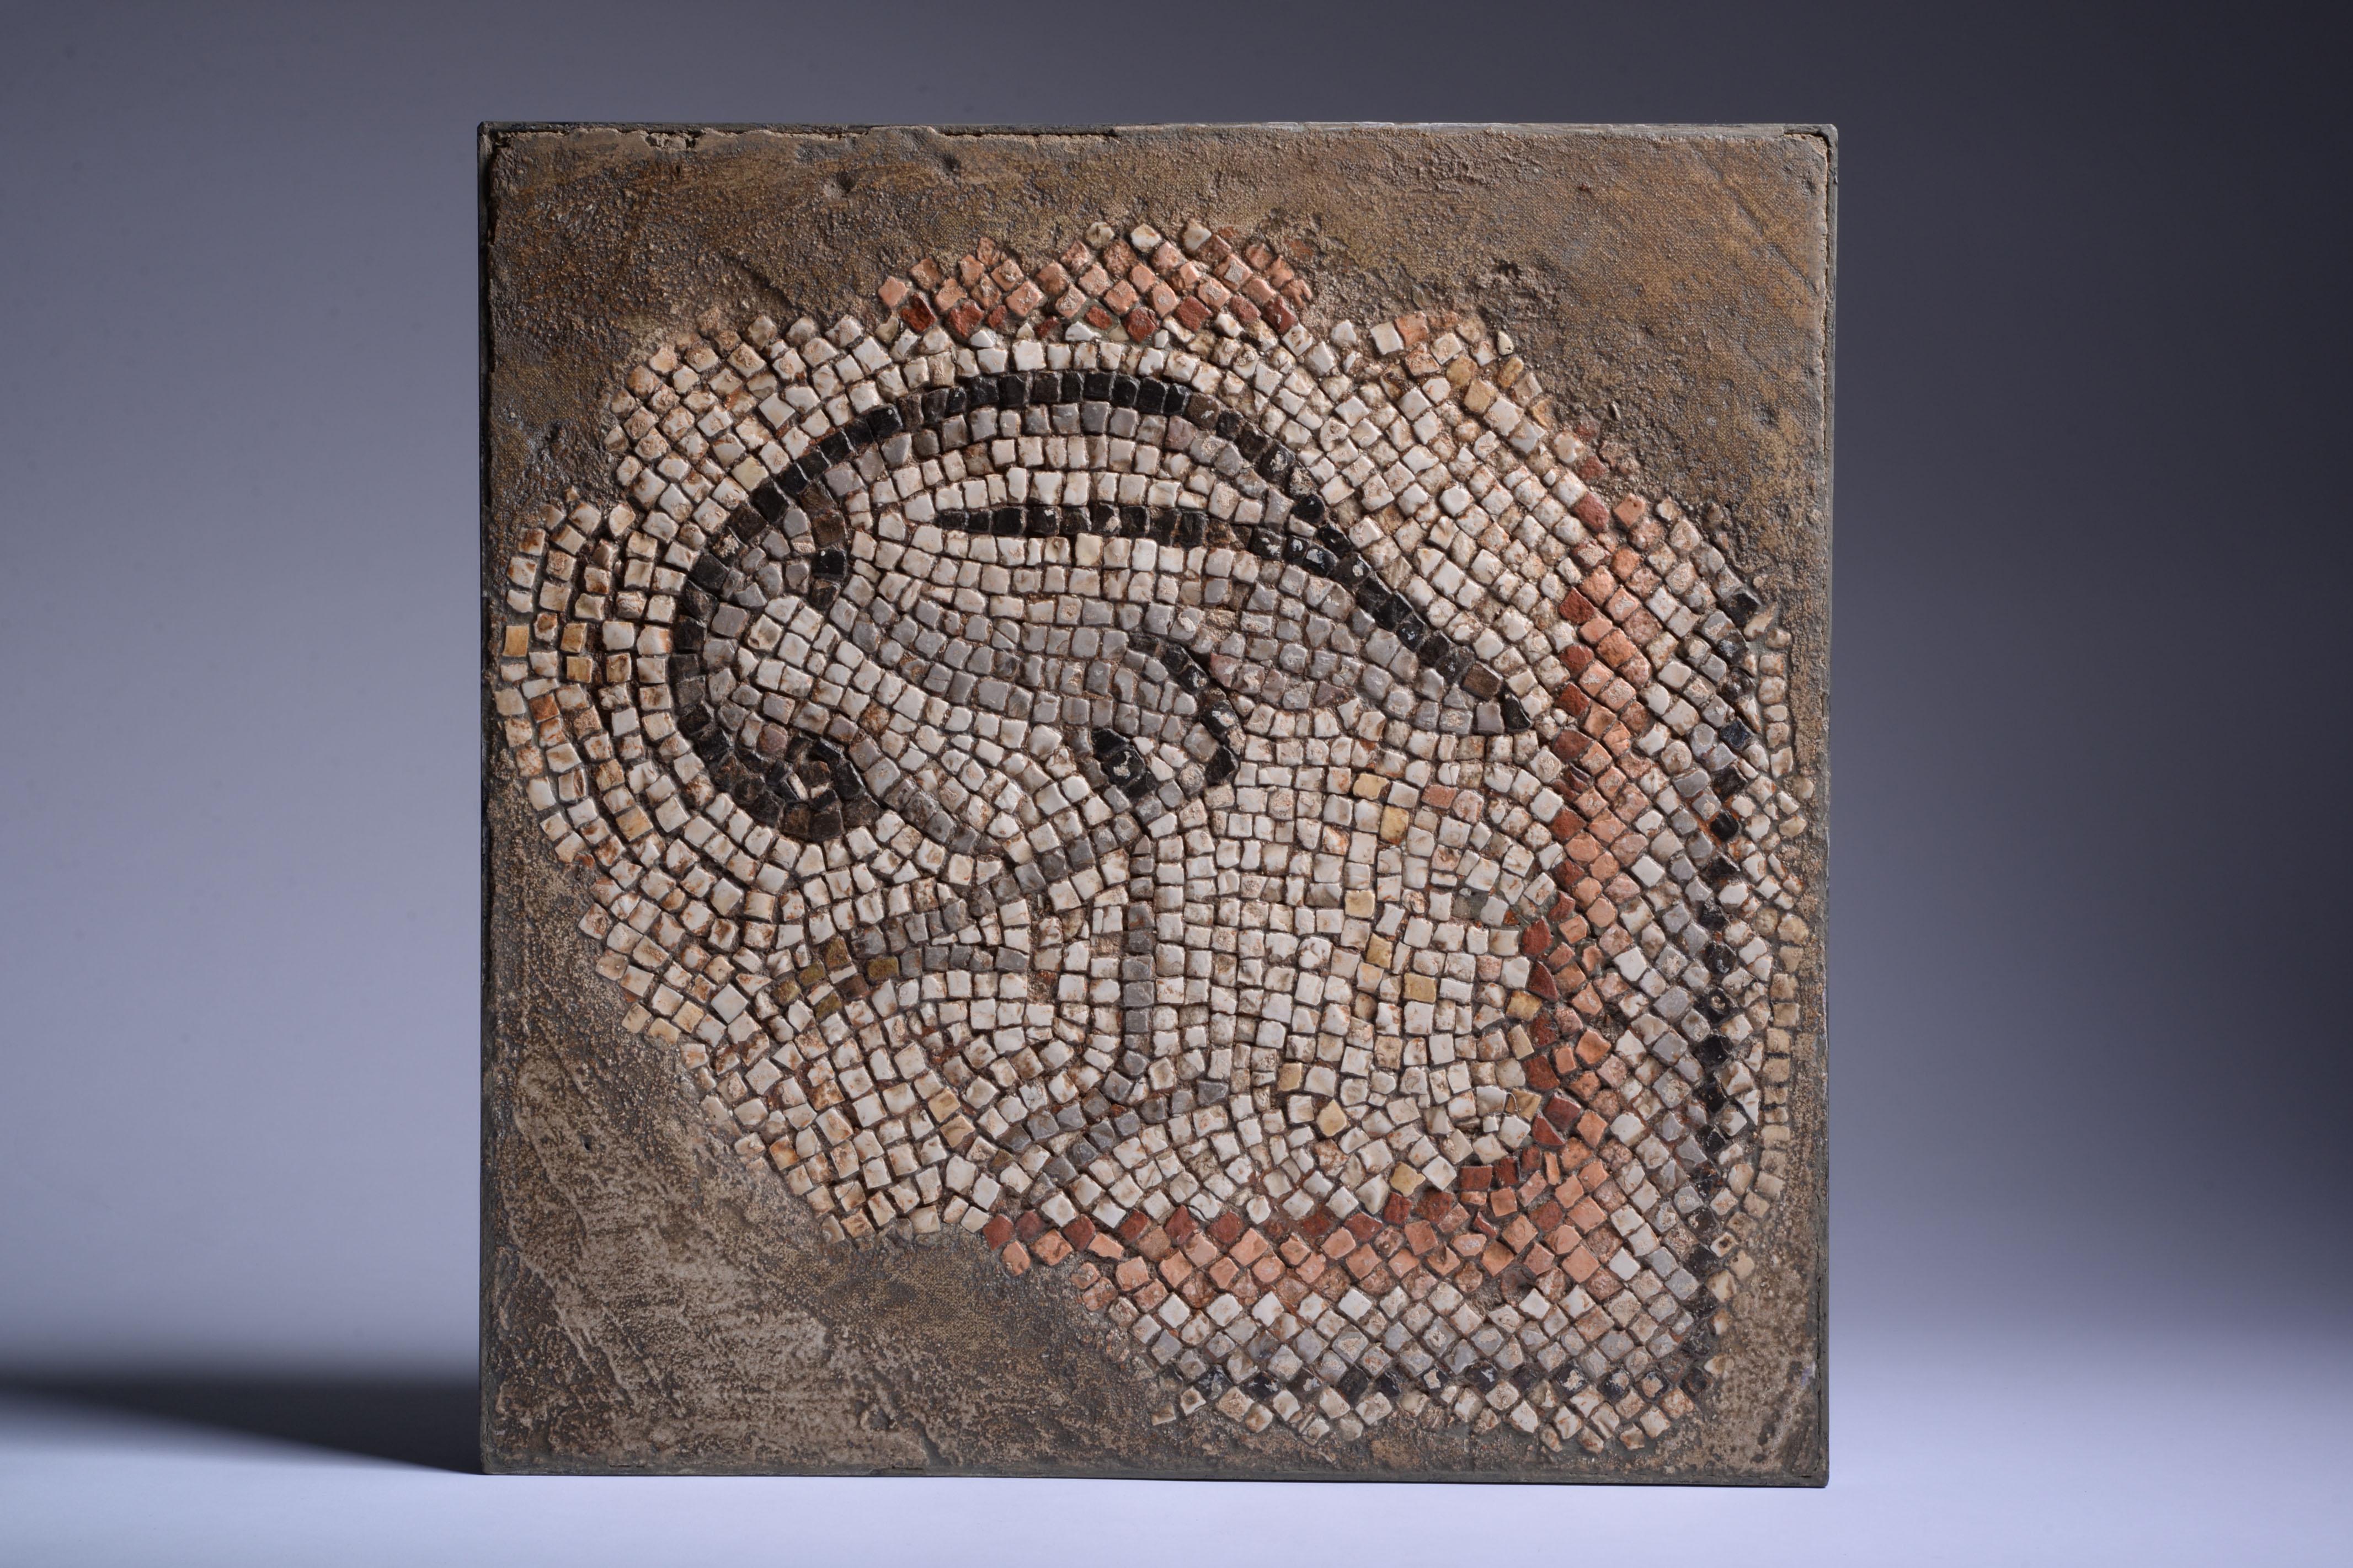 Eastern Roman Mosaic depicting a Bird
Lebanon, 3rd Century A.D.
Measures: 40 x 40 cm

A charming Roman mosaic, depicting a bird, made from polished stone tesserae ranging from hues of jet black to ivory and burnt umber. The bird, perhaps a